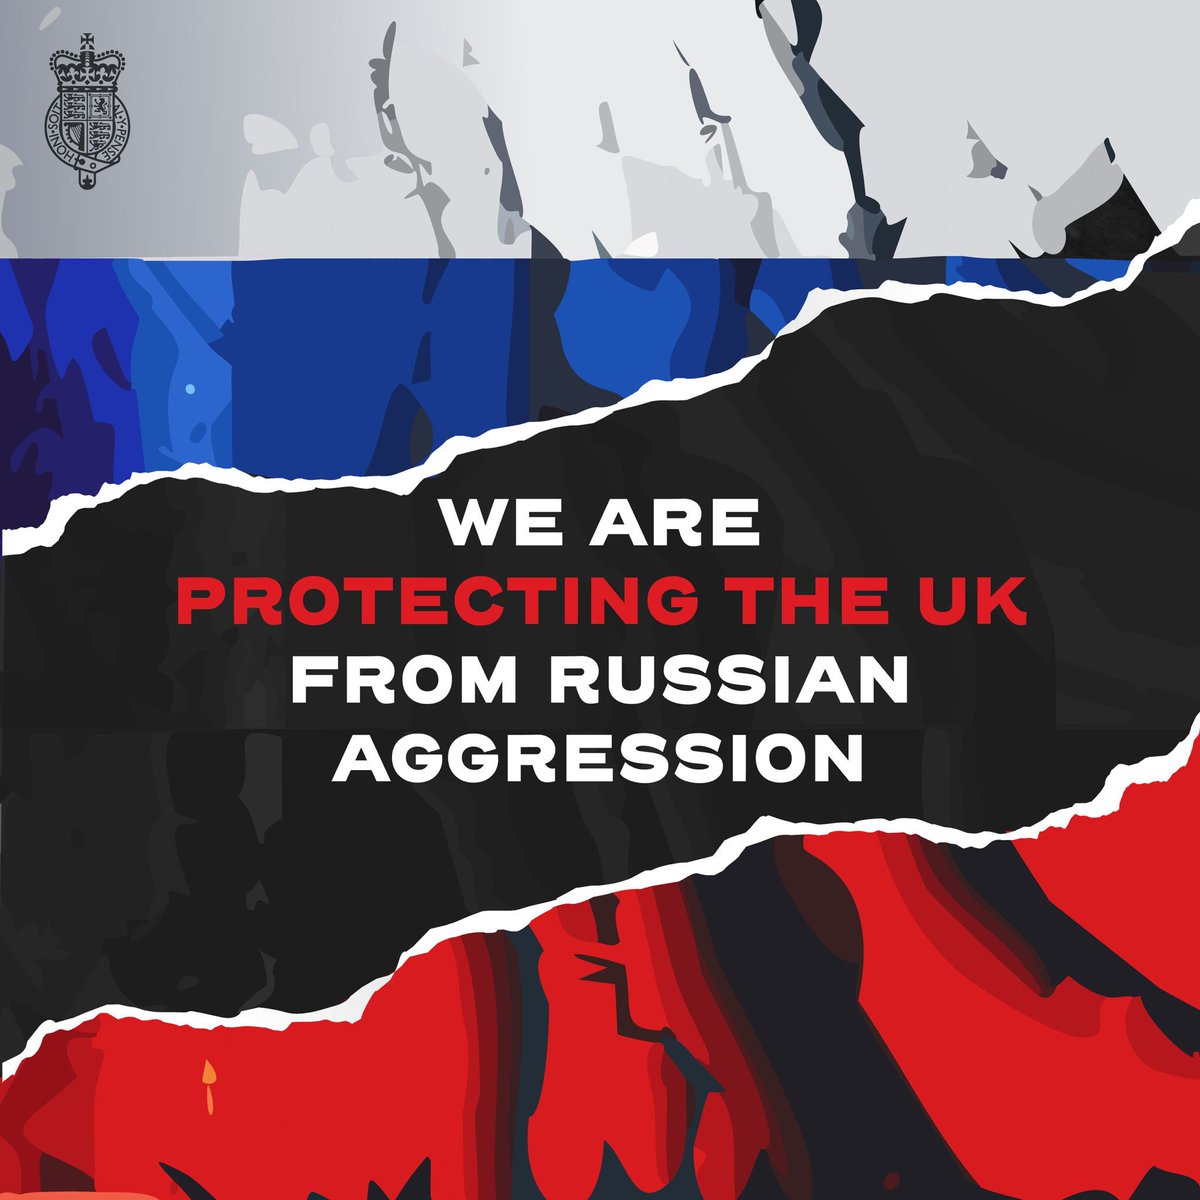 Russia think they can divide Europe through continued hostile action. They are wrong. Today, we have announced we are expelling an undeclared Russian military intelligence officer and are placing limits on the amount of time their diplomats are able to stay in the UK.